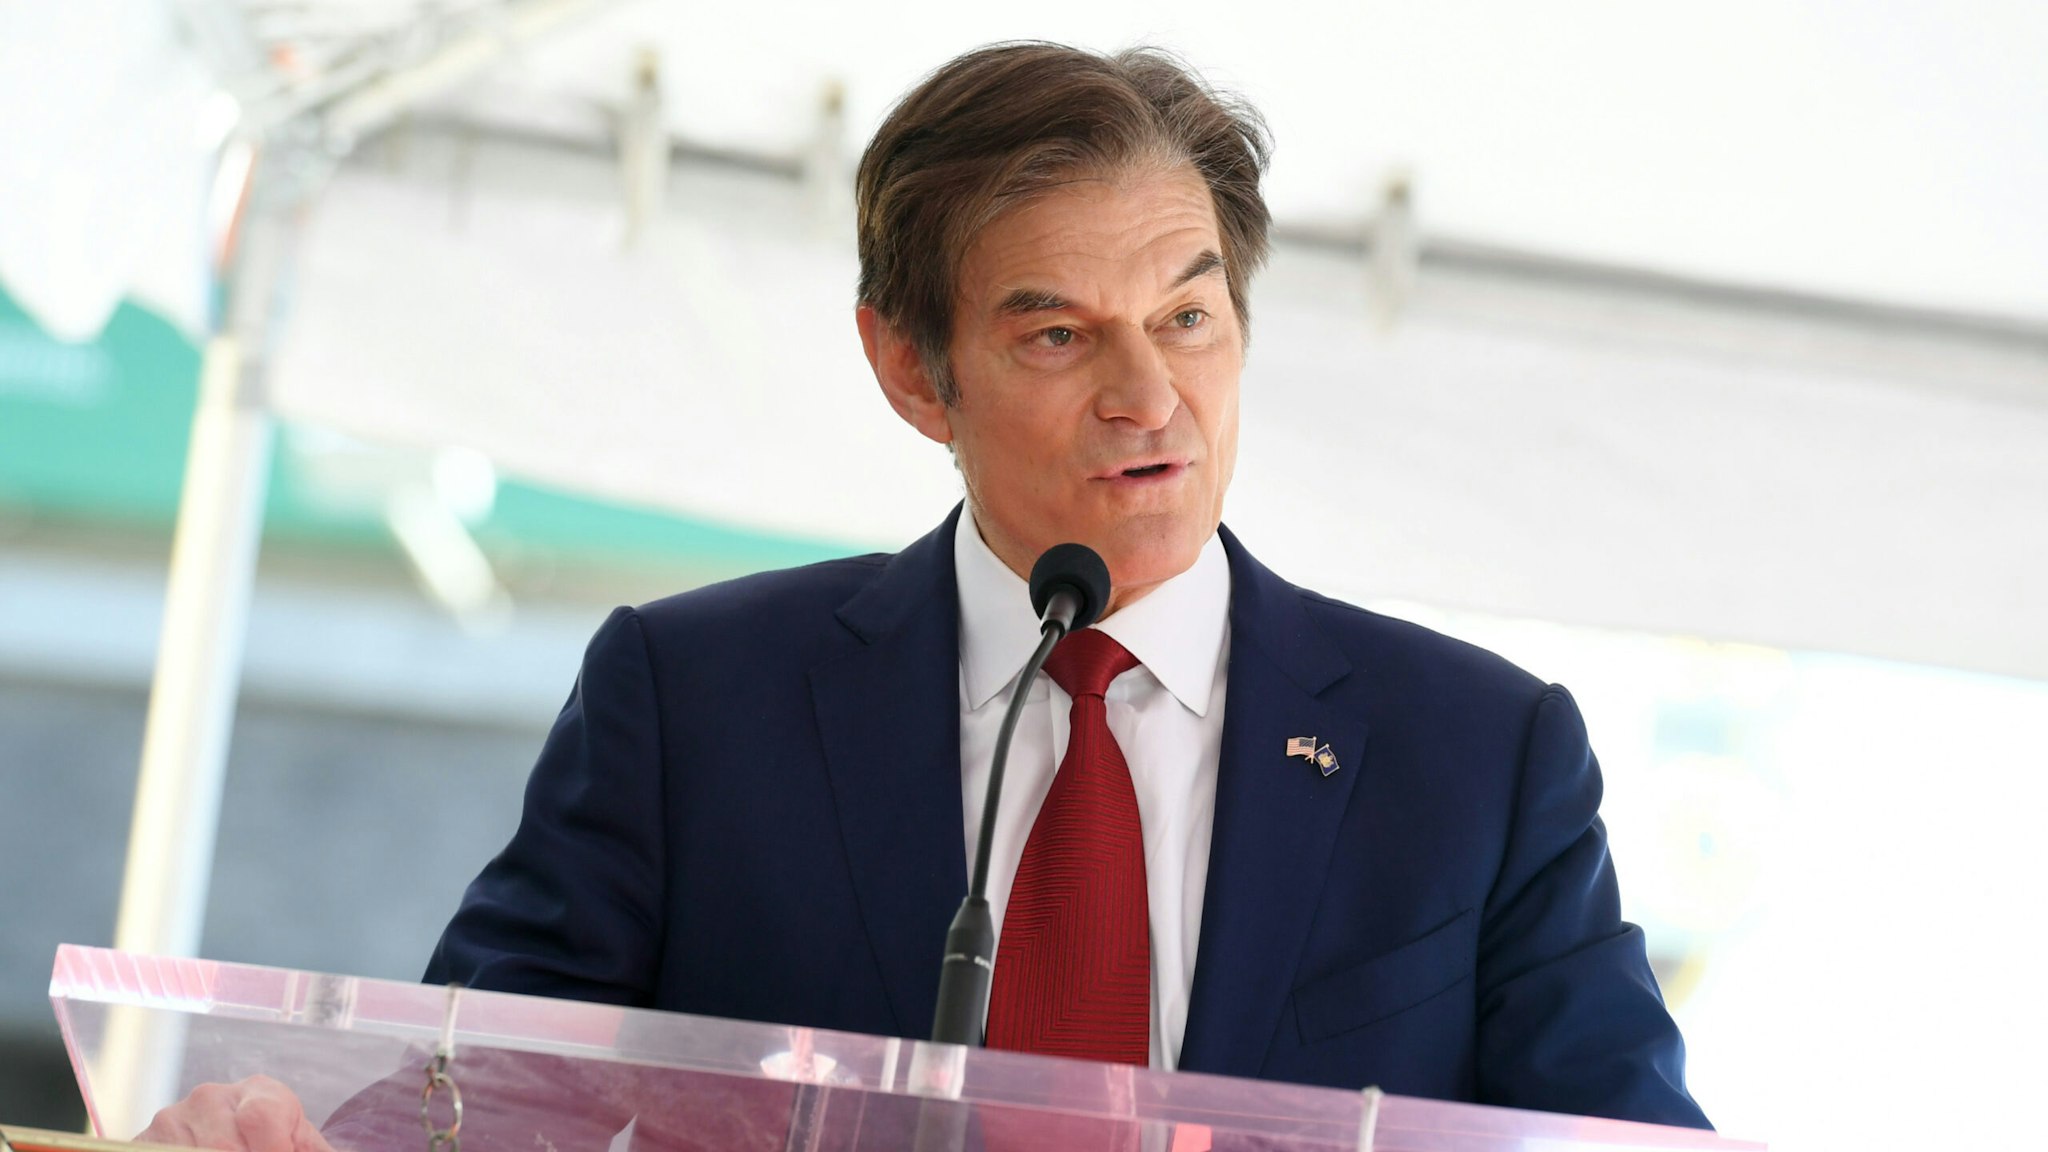 Dr. Mehmet Oz speaks at the Hollywood Walk of Fame Star Ceremony for Dr. Oz on February 11, 2022 in Hollywood, California.